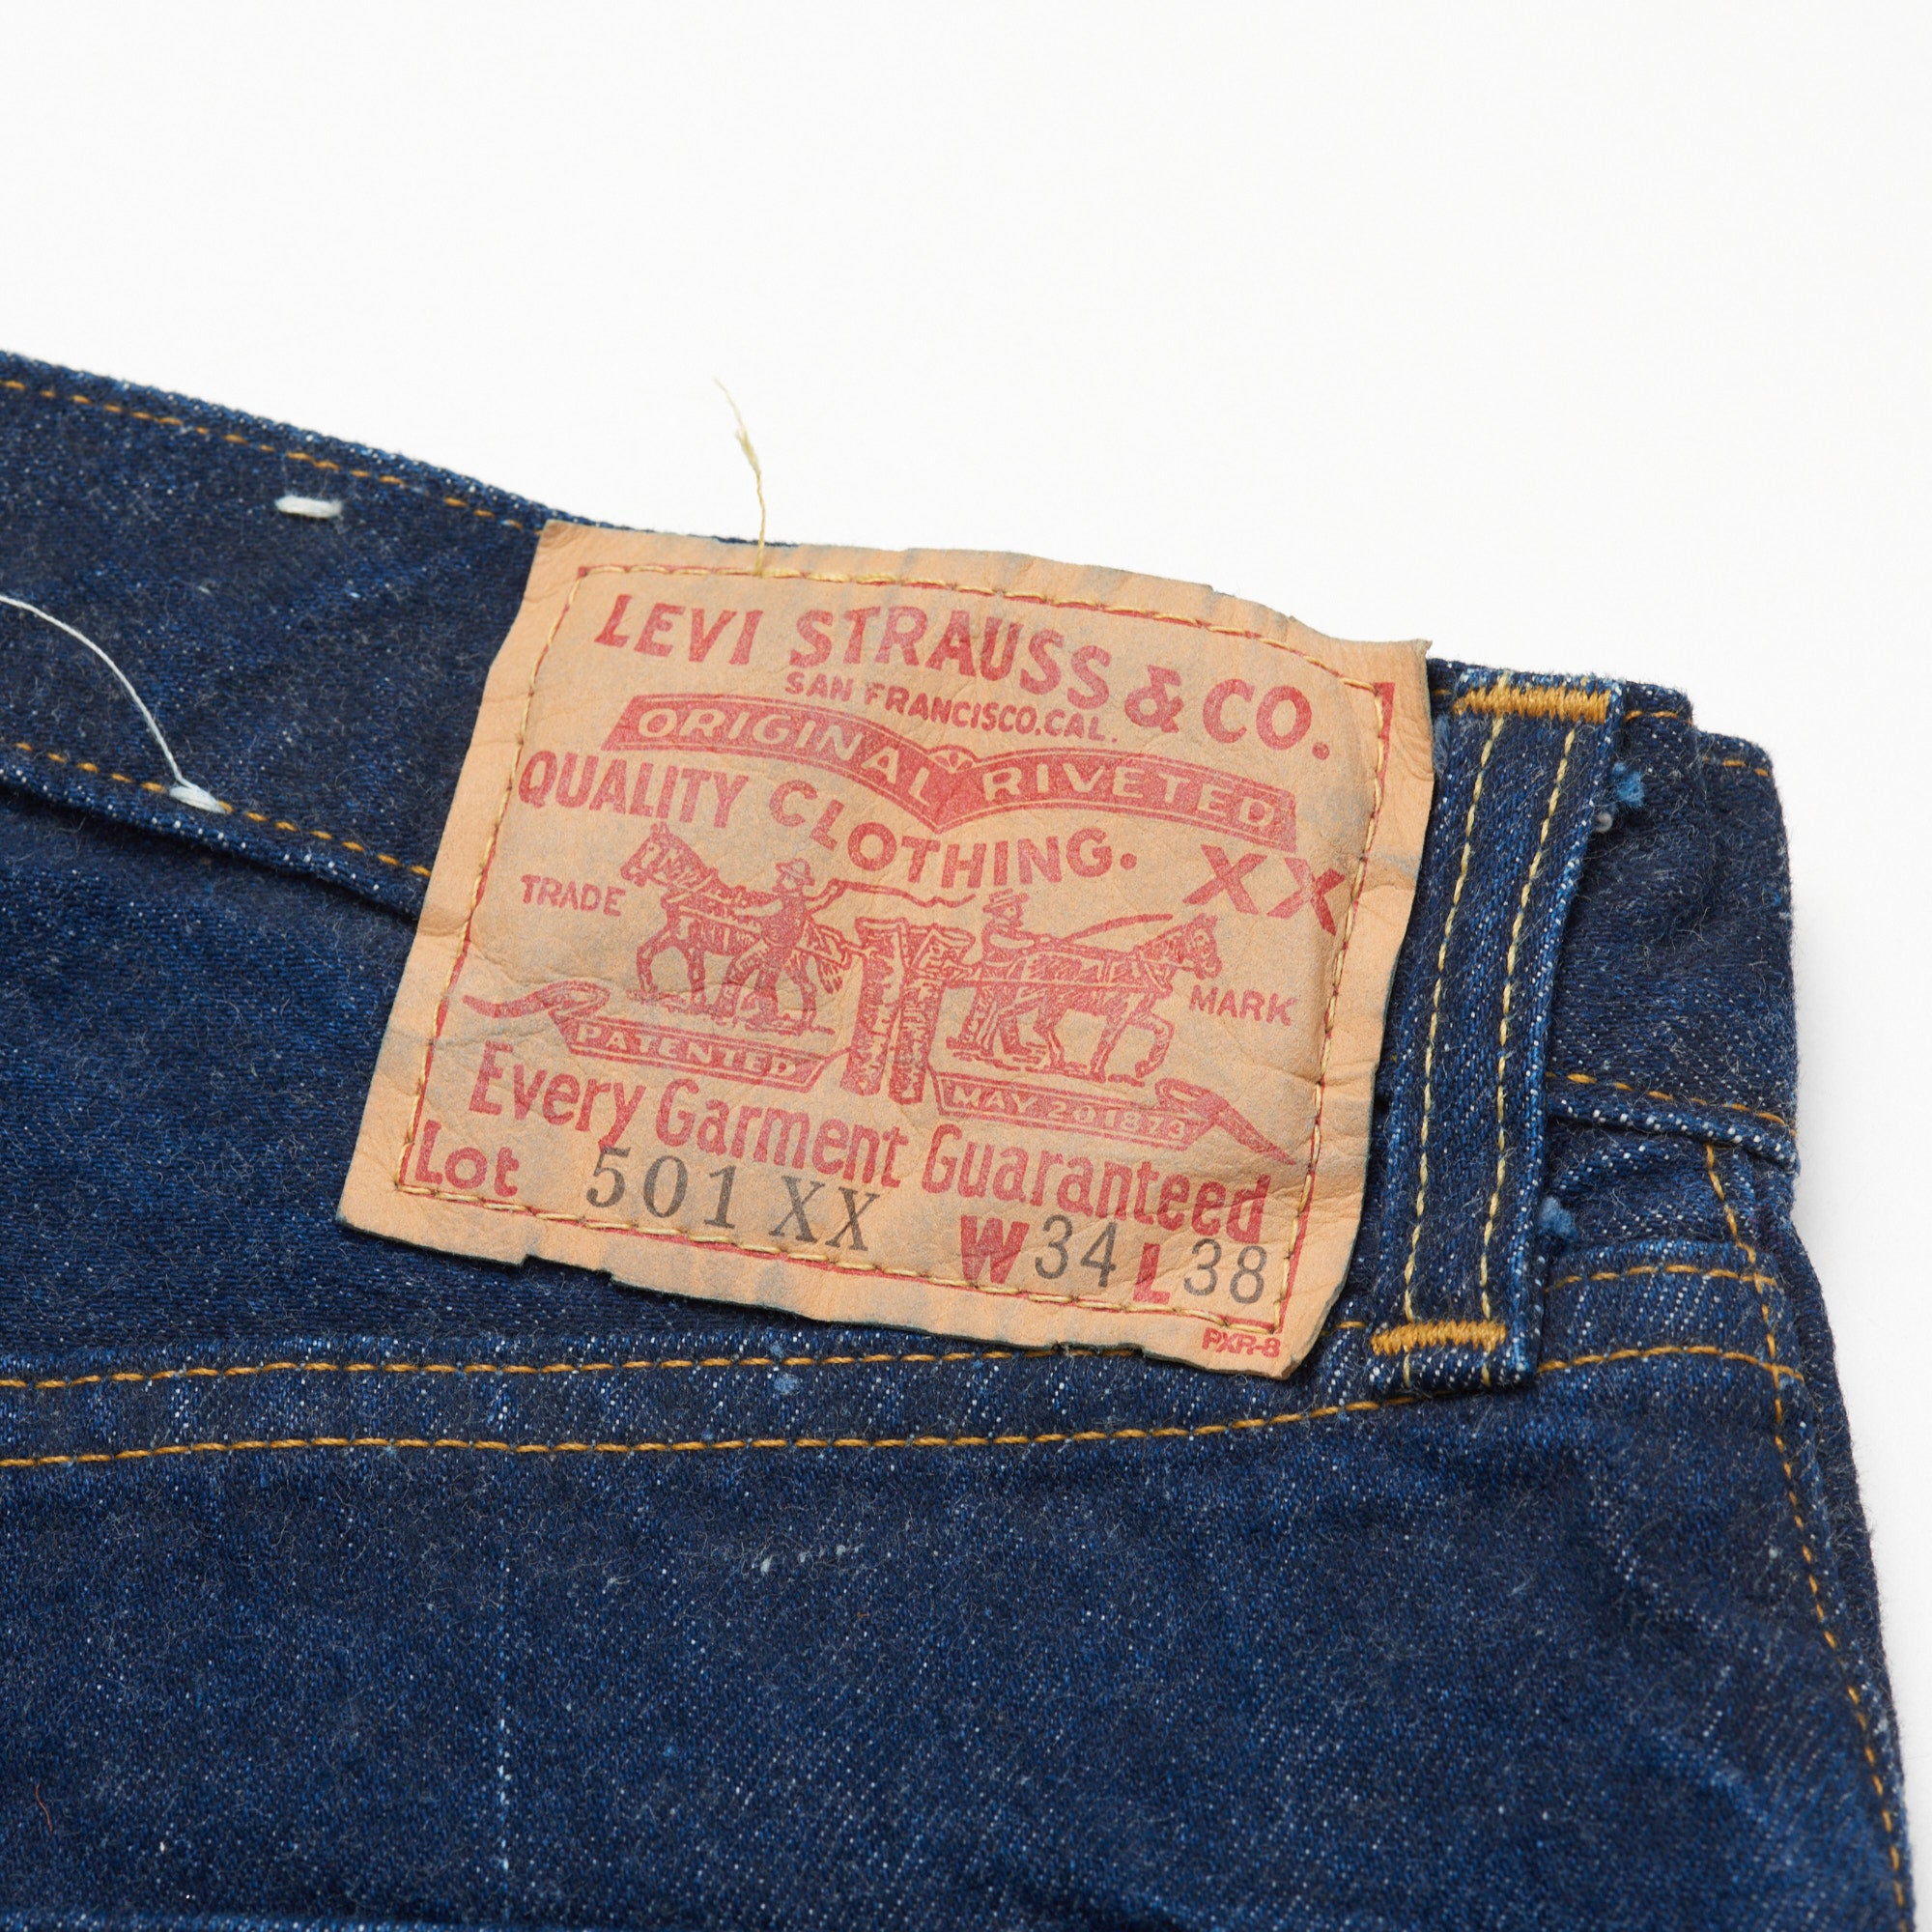 LEVI'S LVC 501 XX USA 1955 Big E Selvedge Jeans NEW NOS Early issue 34x38 LEVI'S